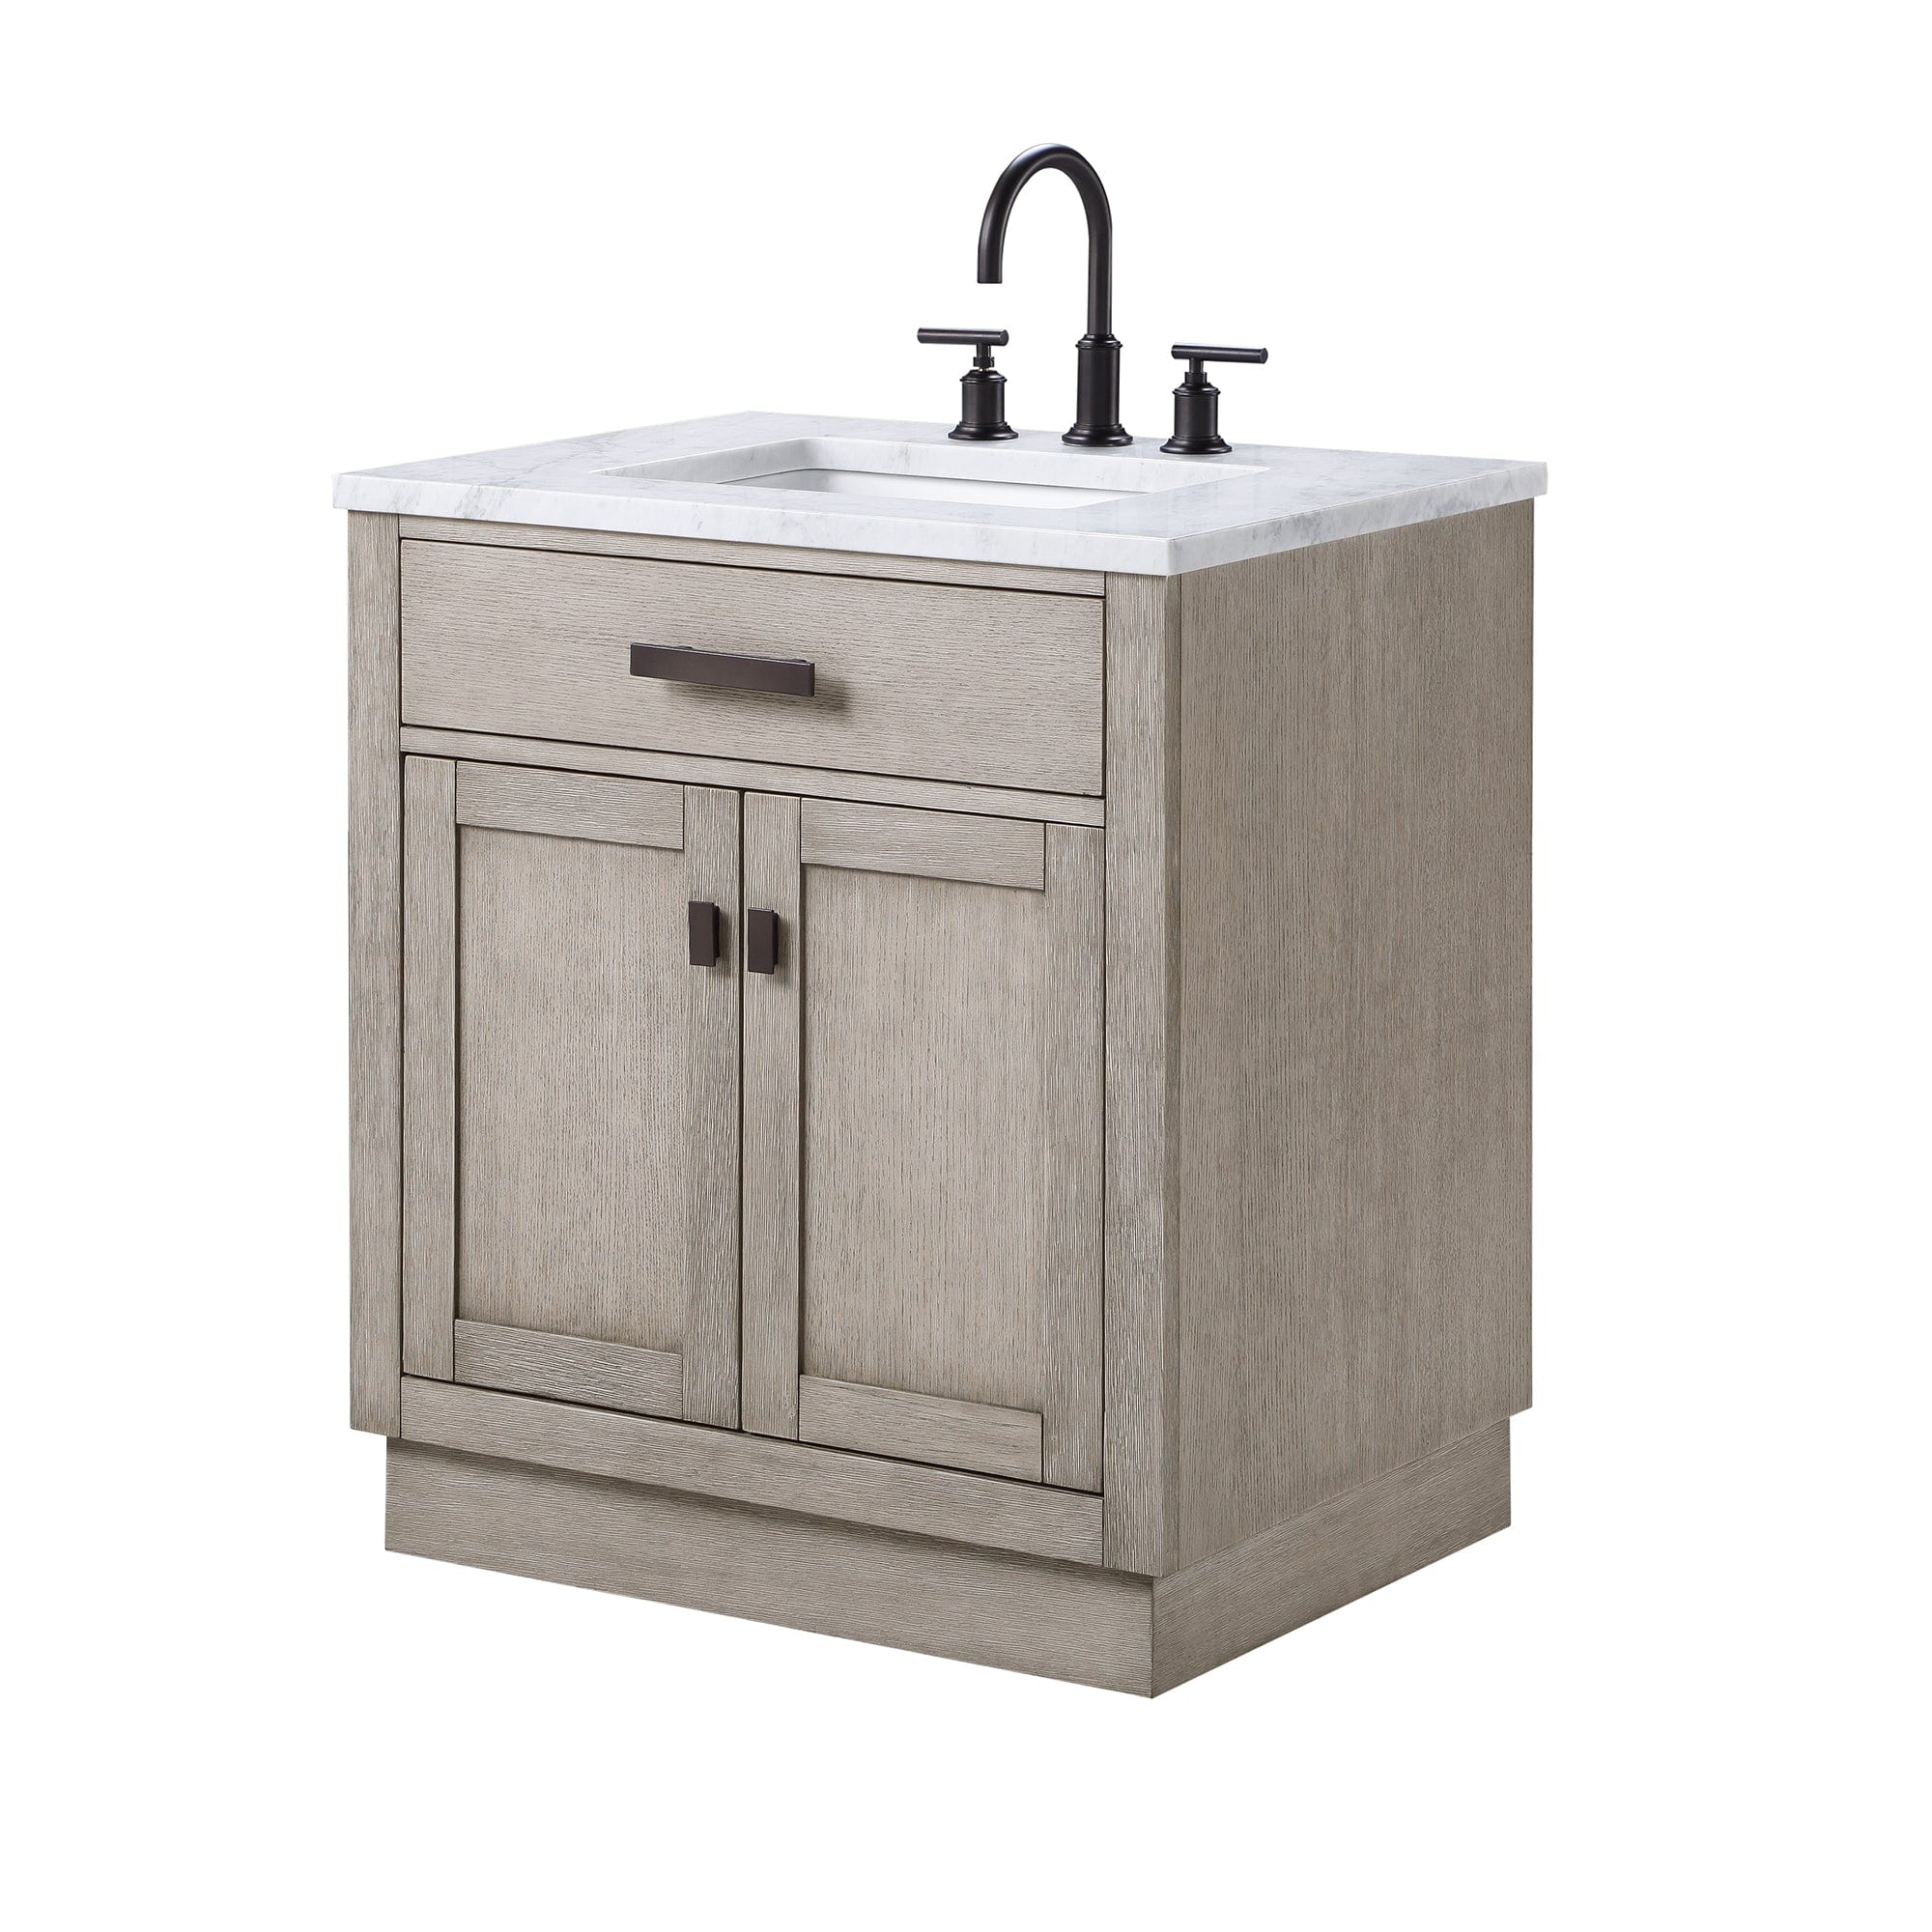 Chestnut 30 In. Single Sink Carrara White Marble Countertop Vanity In Grey Oak with Grooseneck Faucet and Mirror - Molaix732030764675CH30CW03GK-R21BL1403